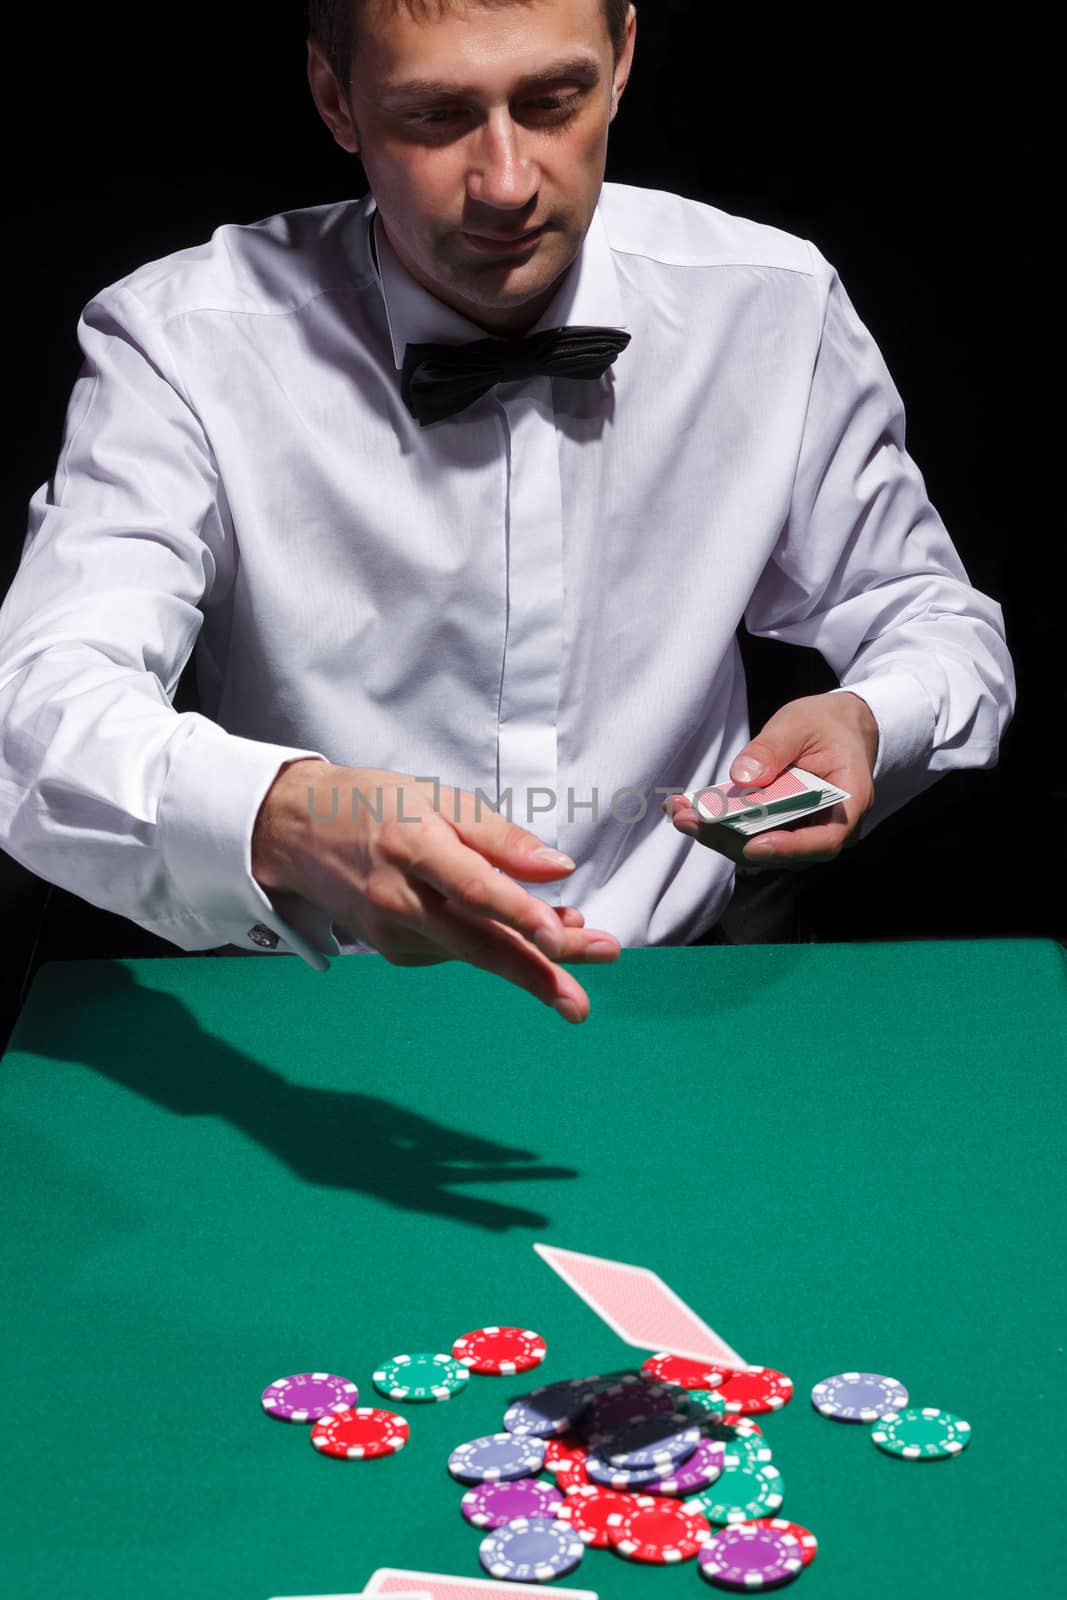 Gentleman in white shirt, playing cards, on black background